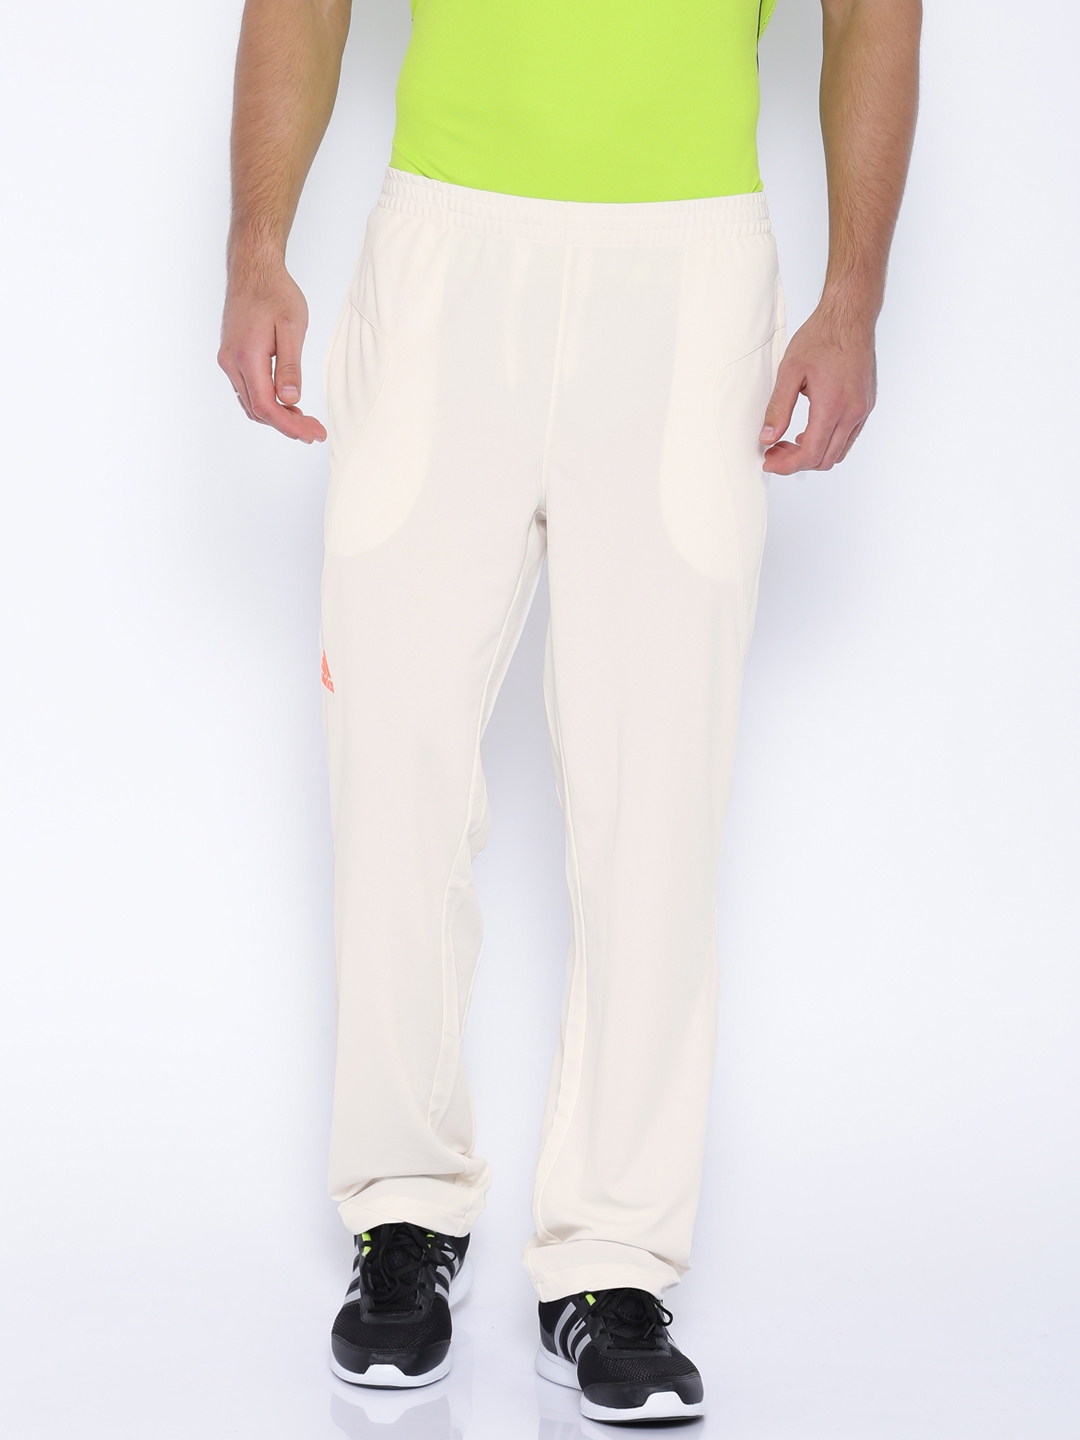 Bovey Tracey CC Adidas Elite Cricket Trousers £42.00 - Cricket Supplies,  Bats, Pads, Gloves, Shoes from Devon County Sports